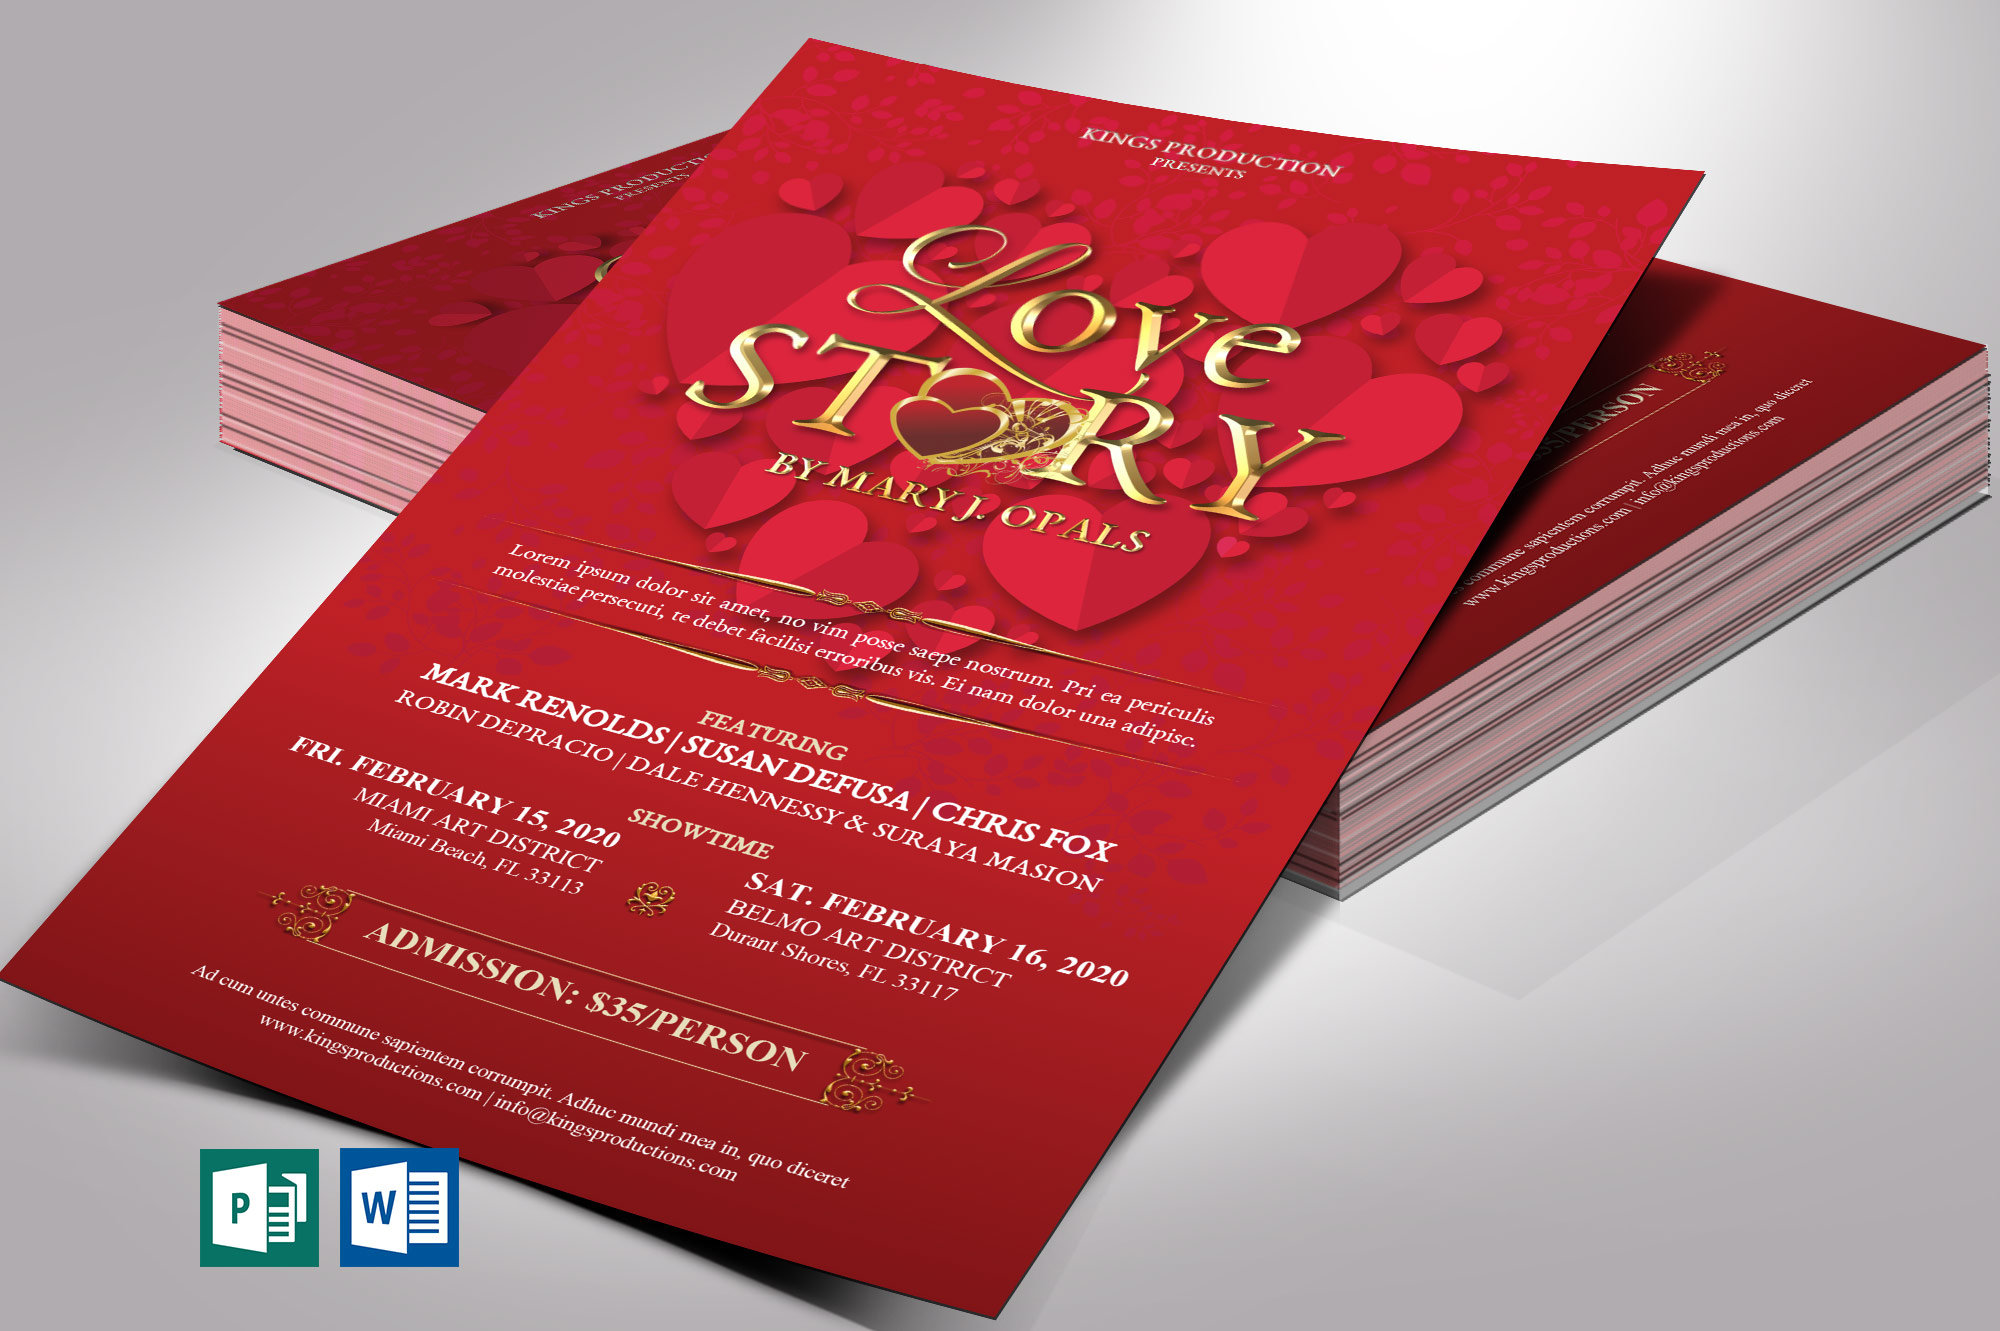 Valentines Love Story Flyer Word Publisher Template  Godserv Designs Throughout Playbill Template Word